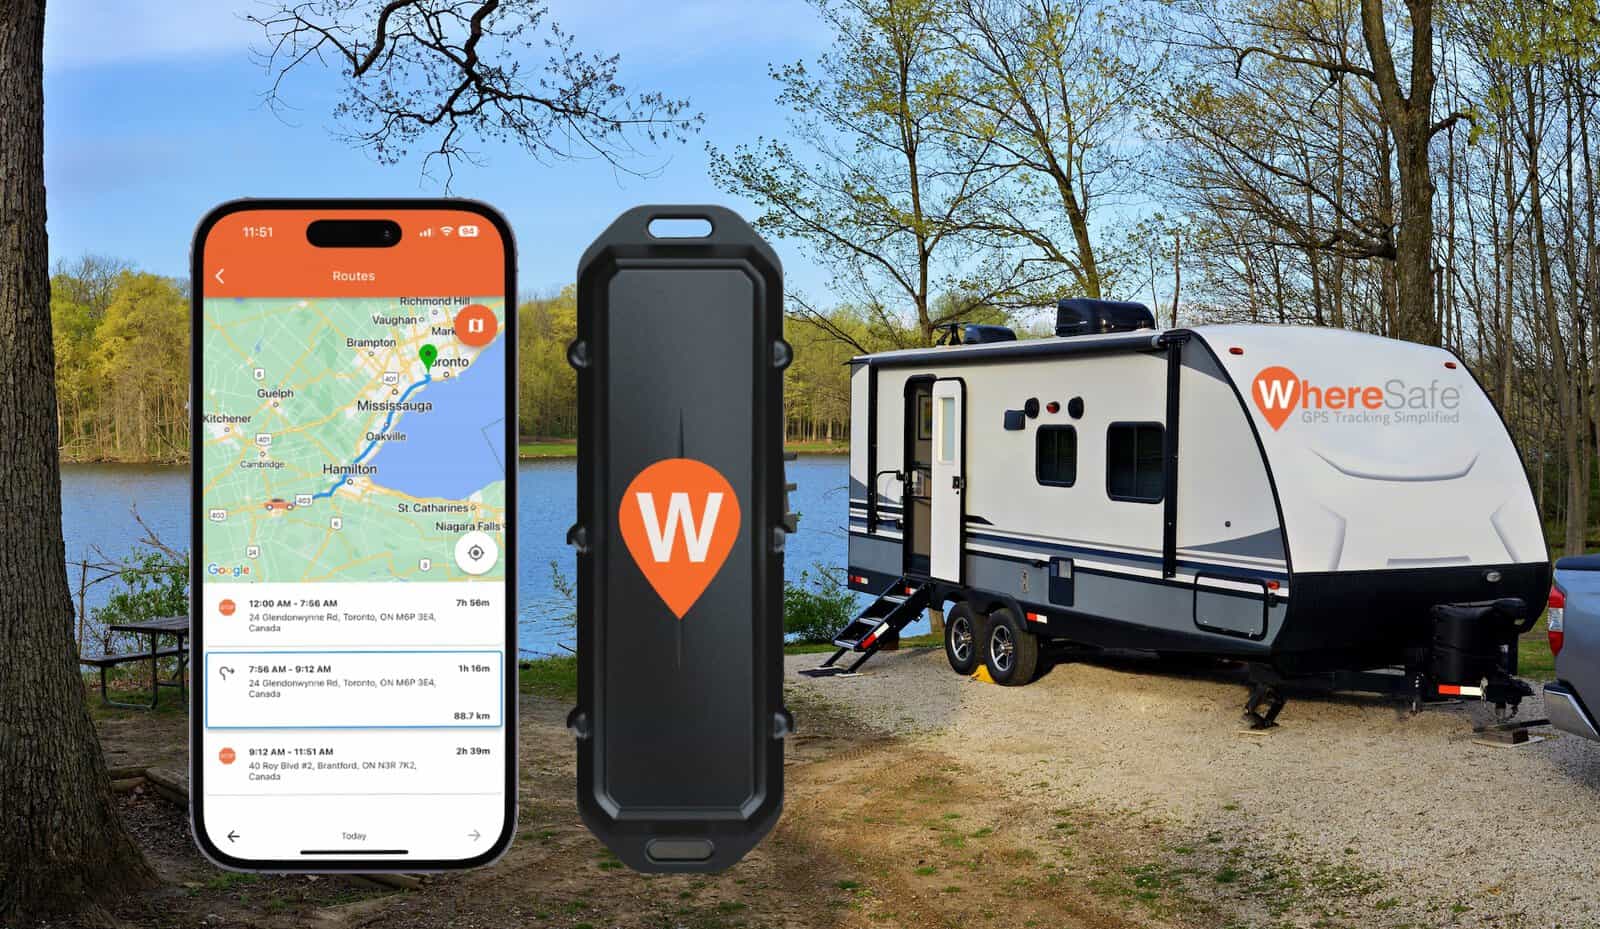 Wheresafe One Tracker shown with a travel trailer